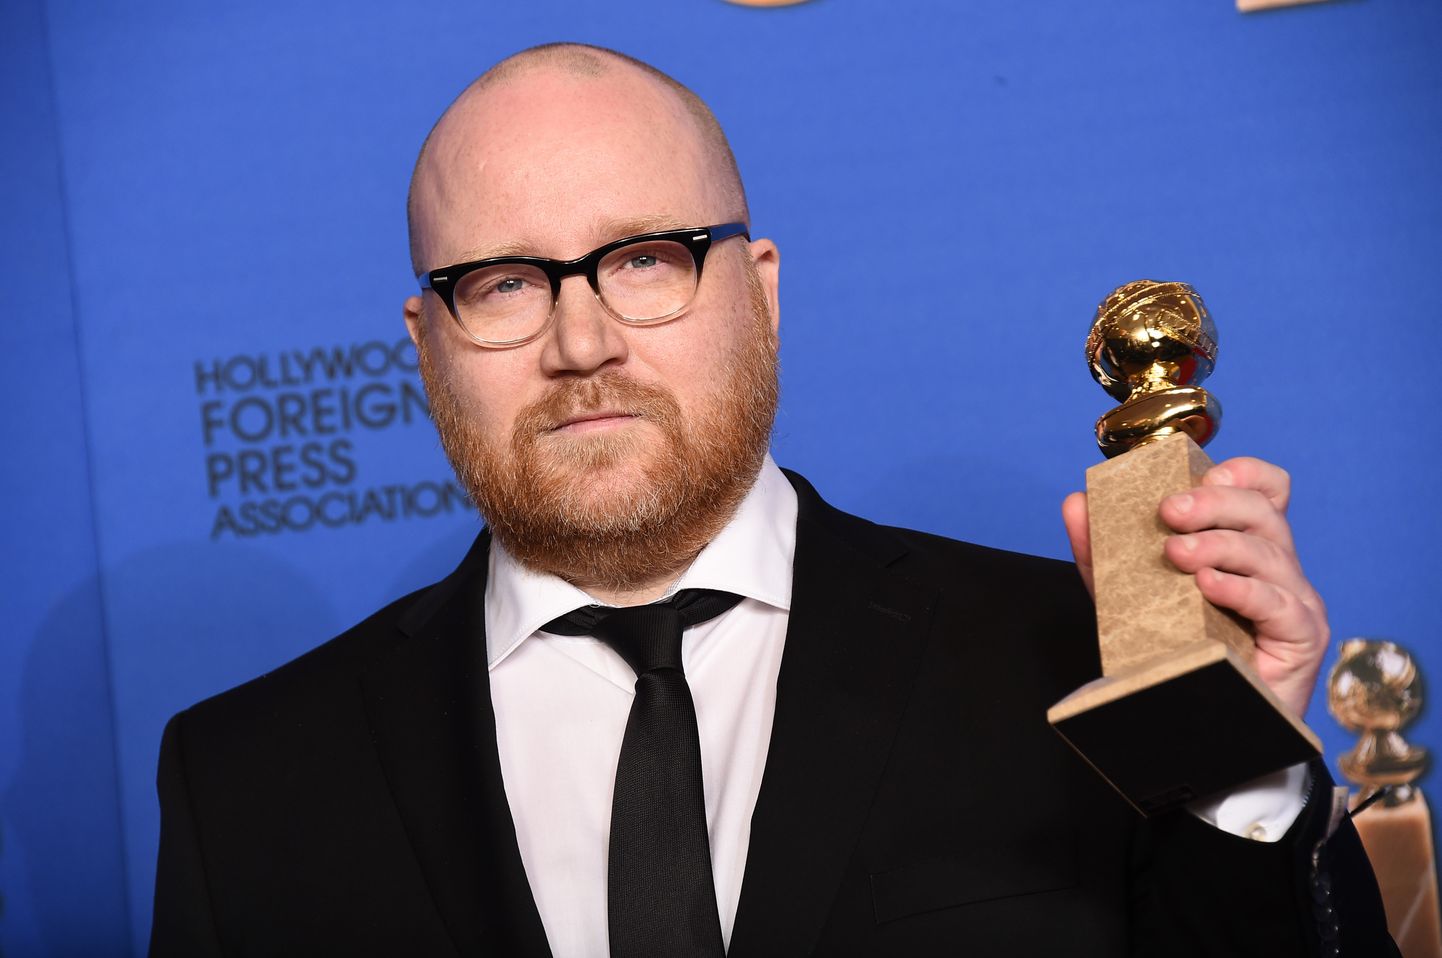 Johann Johannsson poses in the press room with the award for best original score for ?The Theory of Everything? at the 72nd annual Golden Globe Awards at the Beverly Hilton Hotel on Sunday, Jan. 11, 2015, in Beverly Hills, Calif. (Photo by Jordan Strauss/Invision/AP)